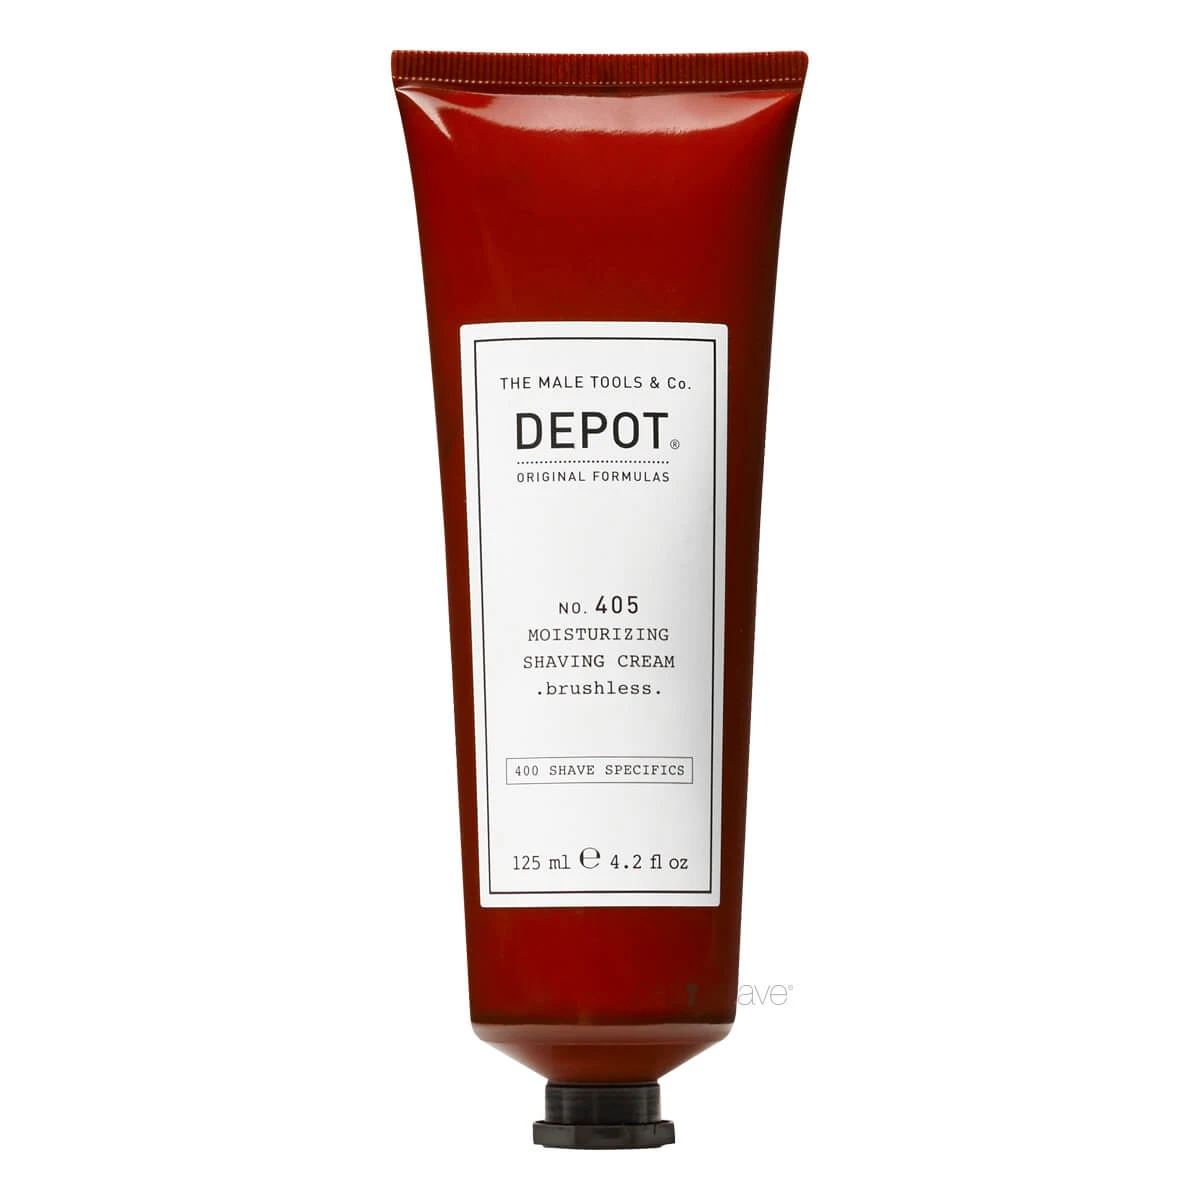 Shaving Creams | Find selection best shaving DK\'s cream in your